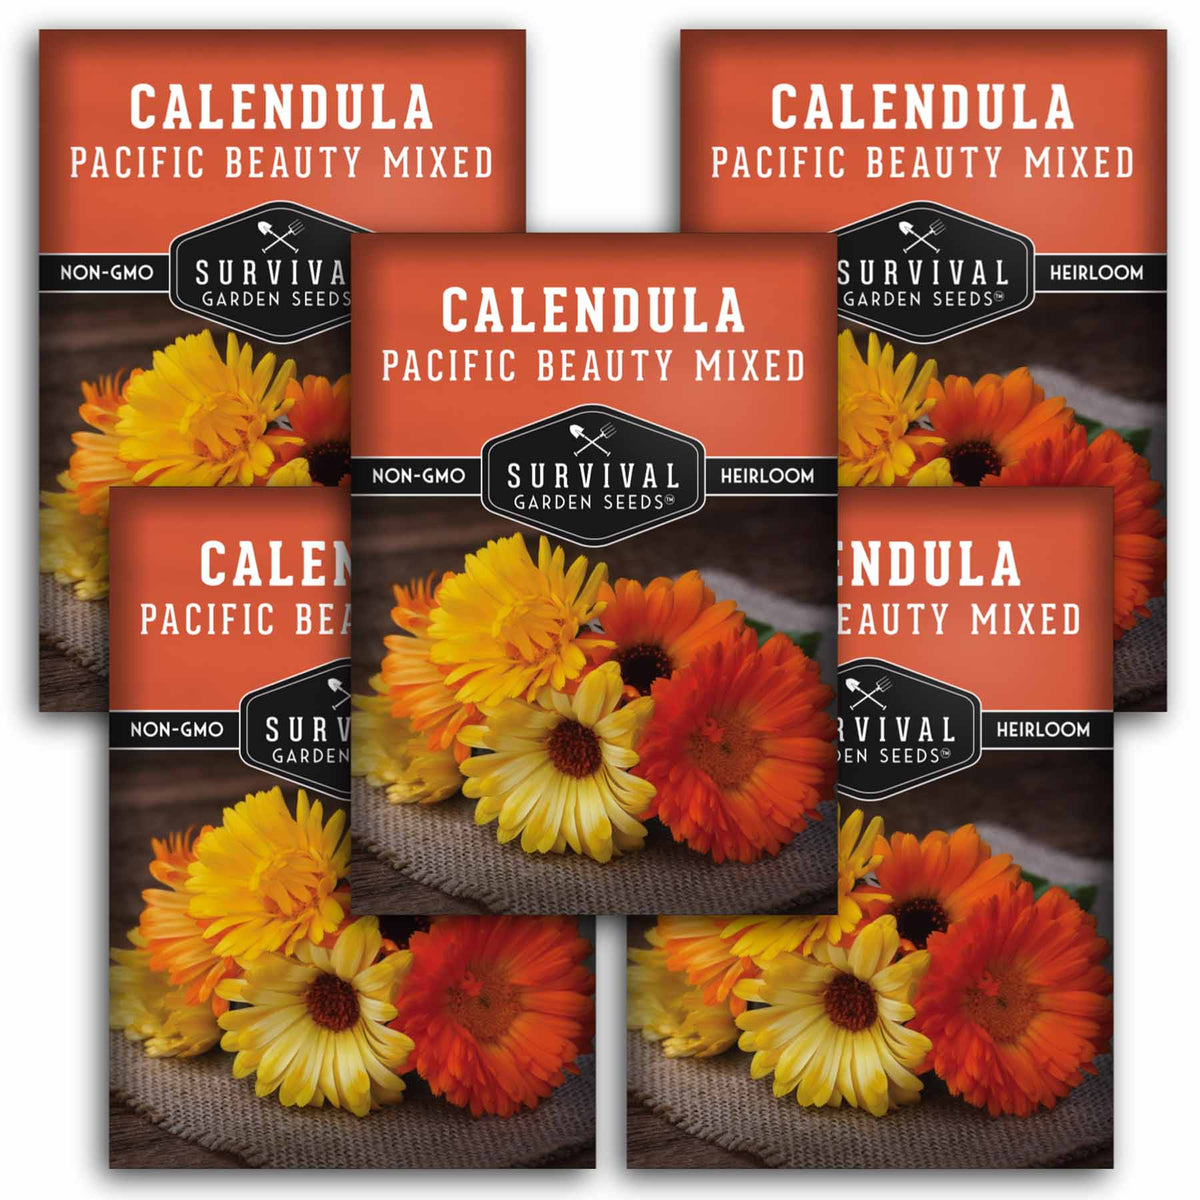 5 packets of Pacific Beauty Calendula seeds